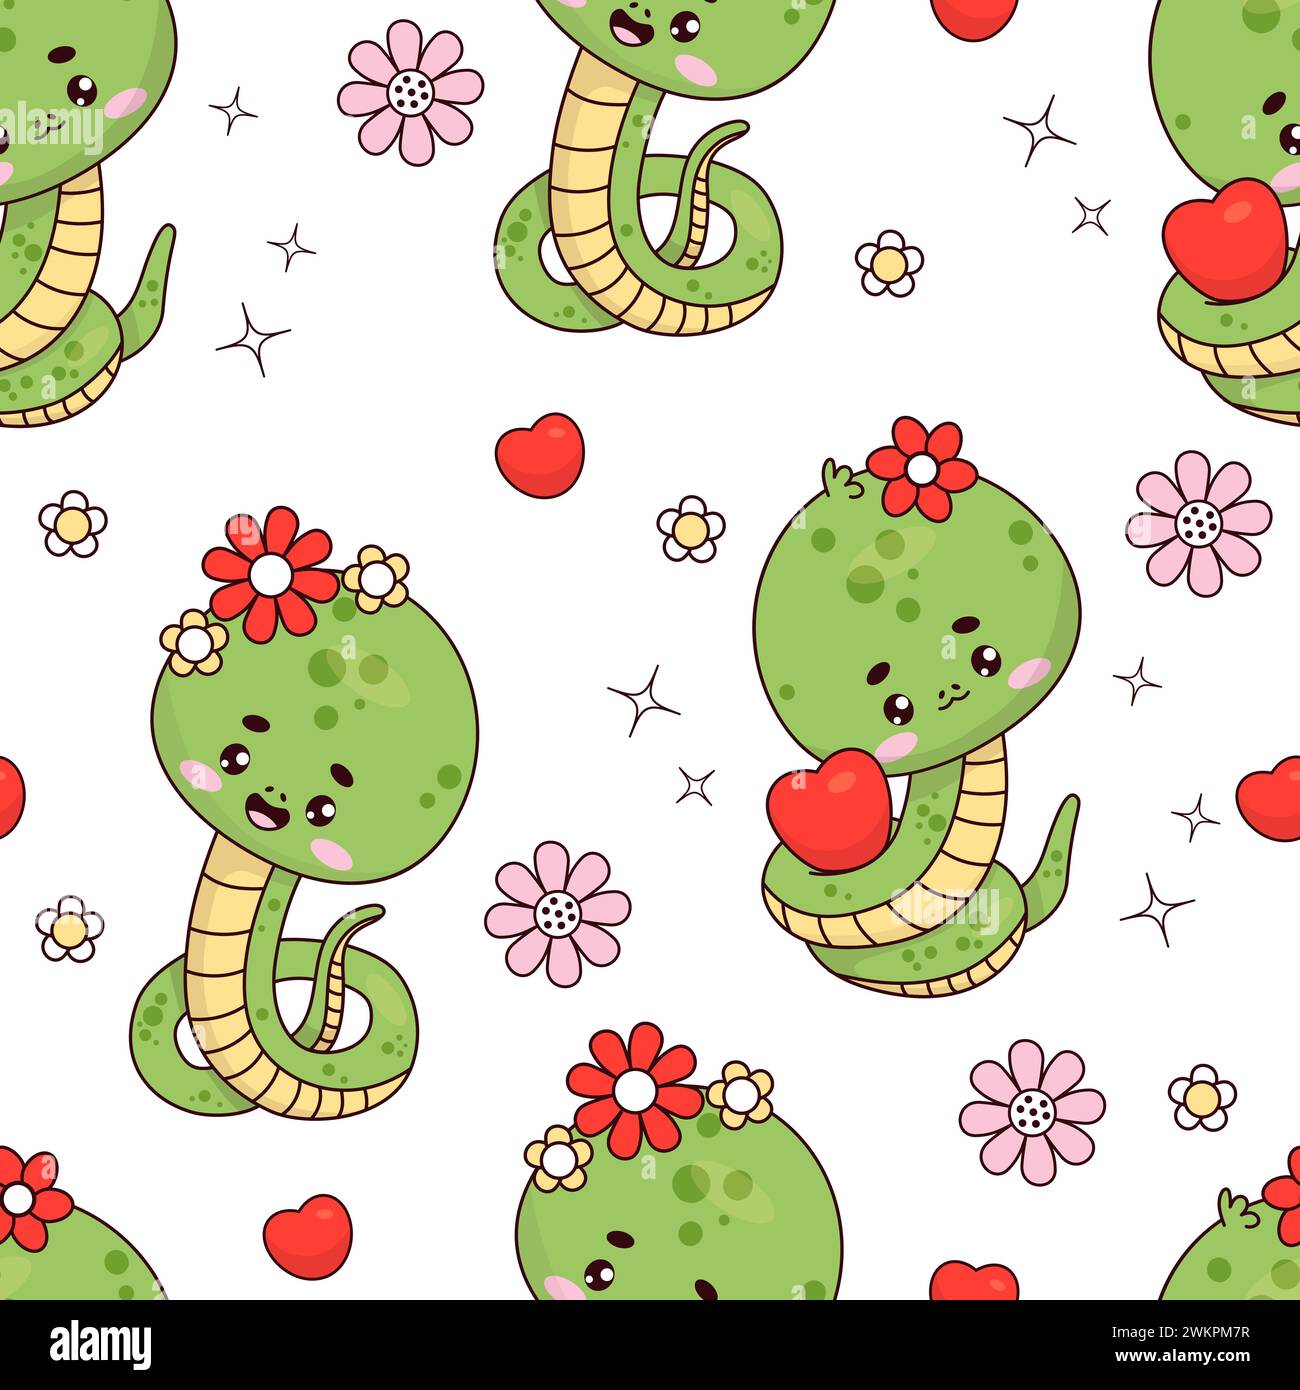 Seamless pattern with cute snake on white background with hearts and daisies. Funny kawaii reptile animal character. Vector illustration. Kids collect Stock Vector